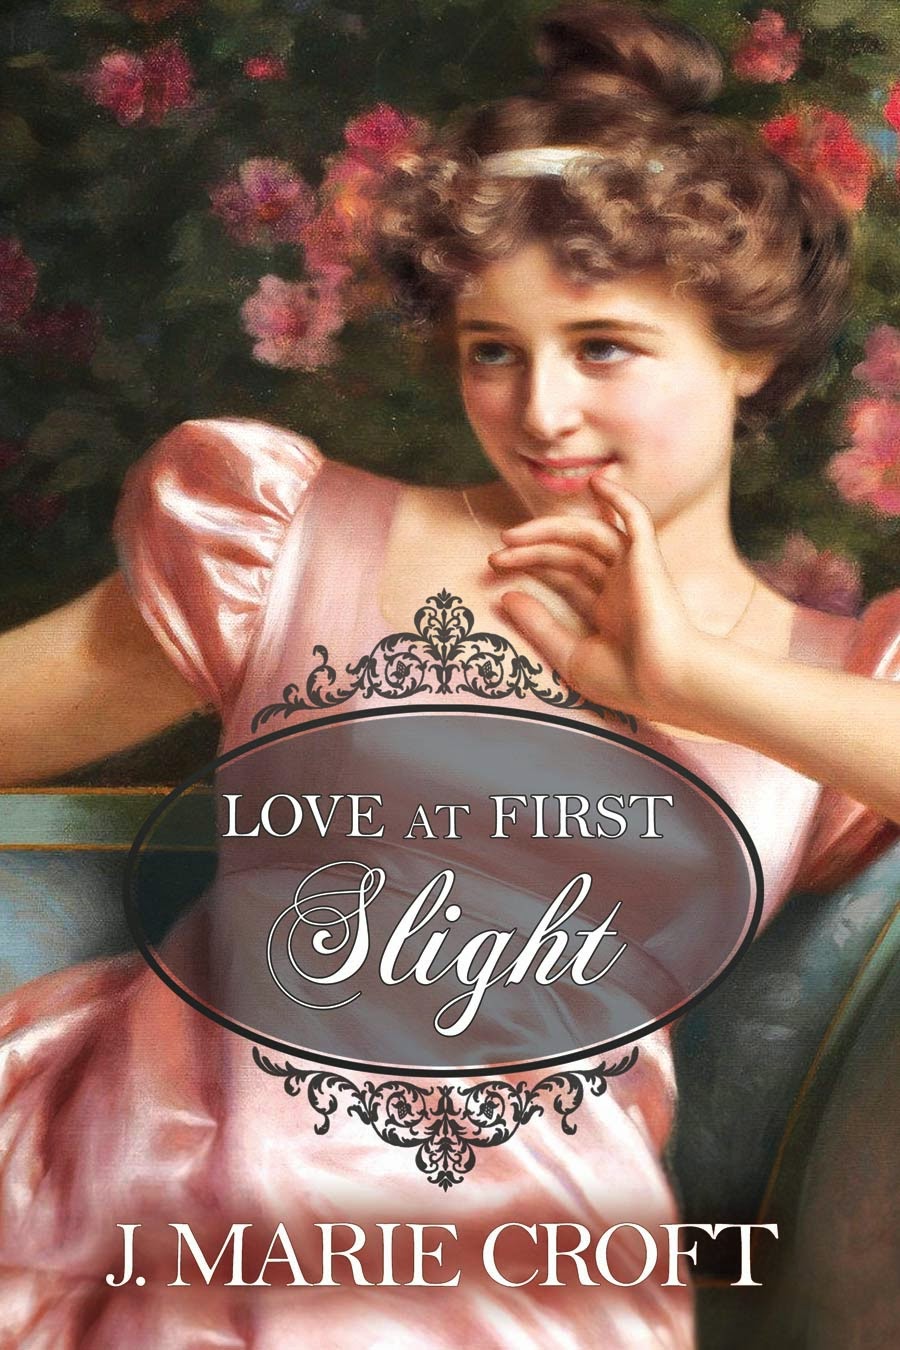 Book cover - Love at First Slight by J Marie Croft